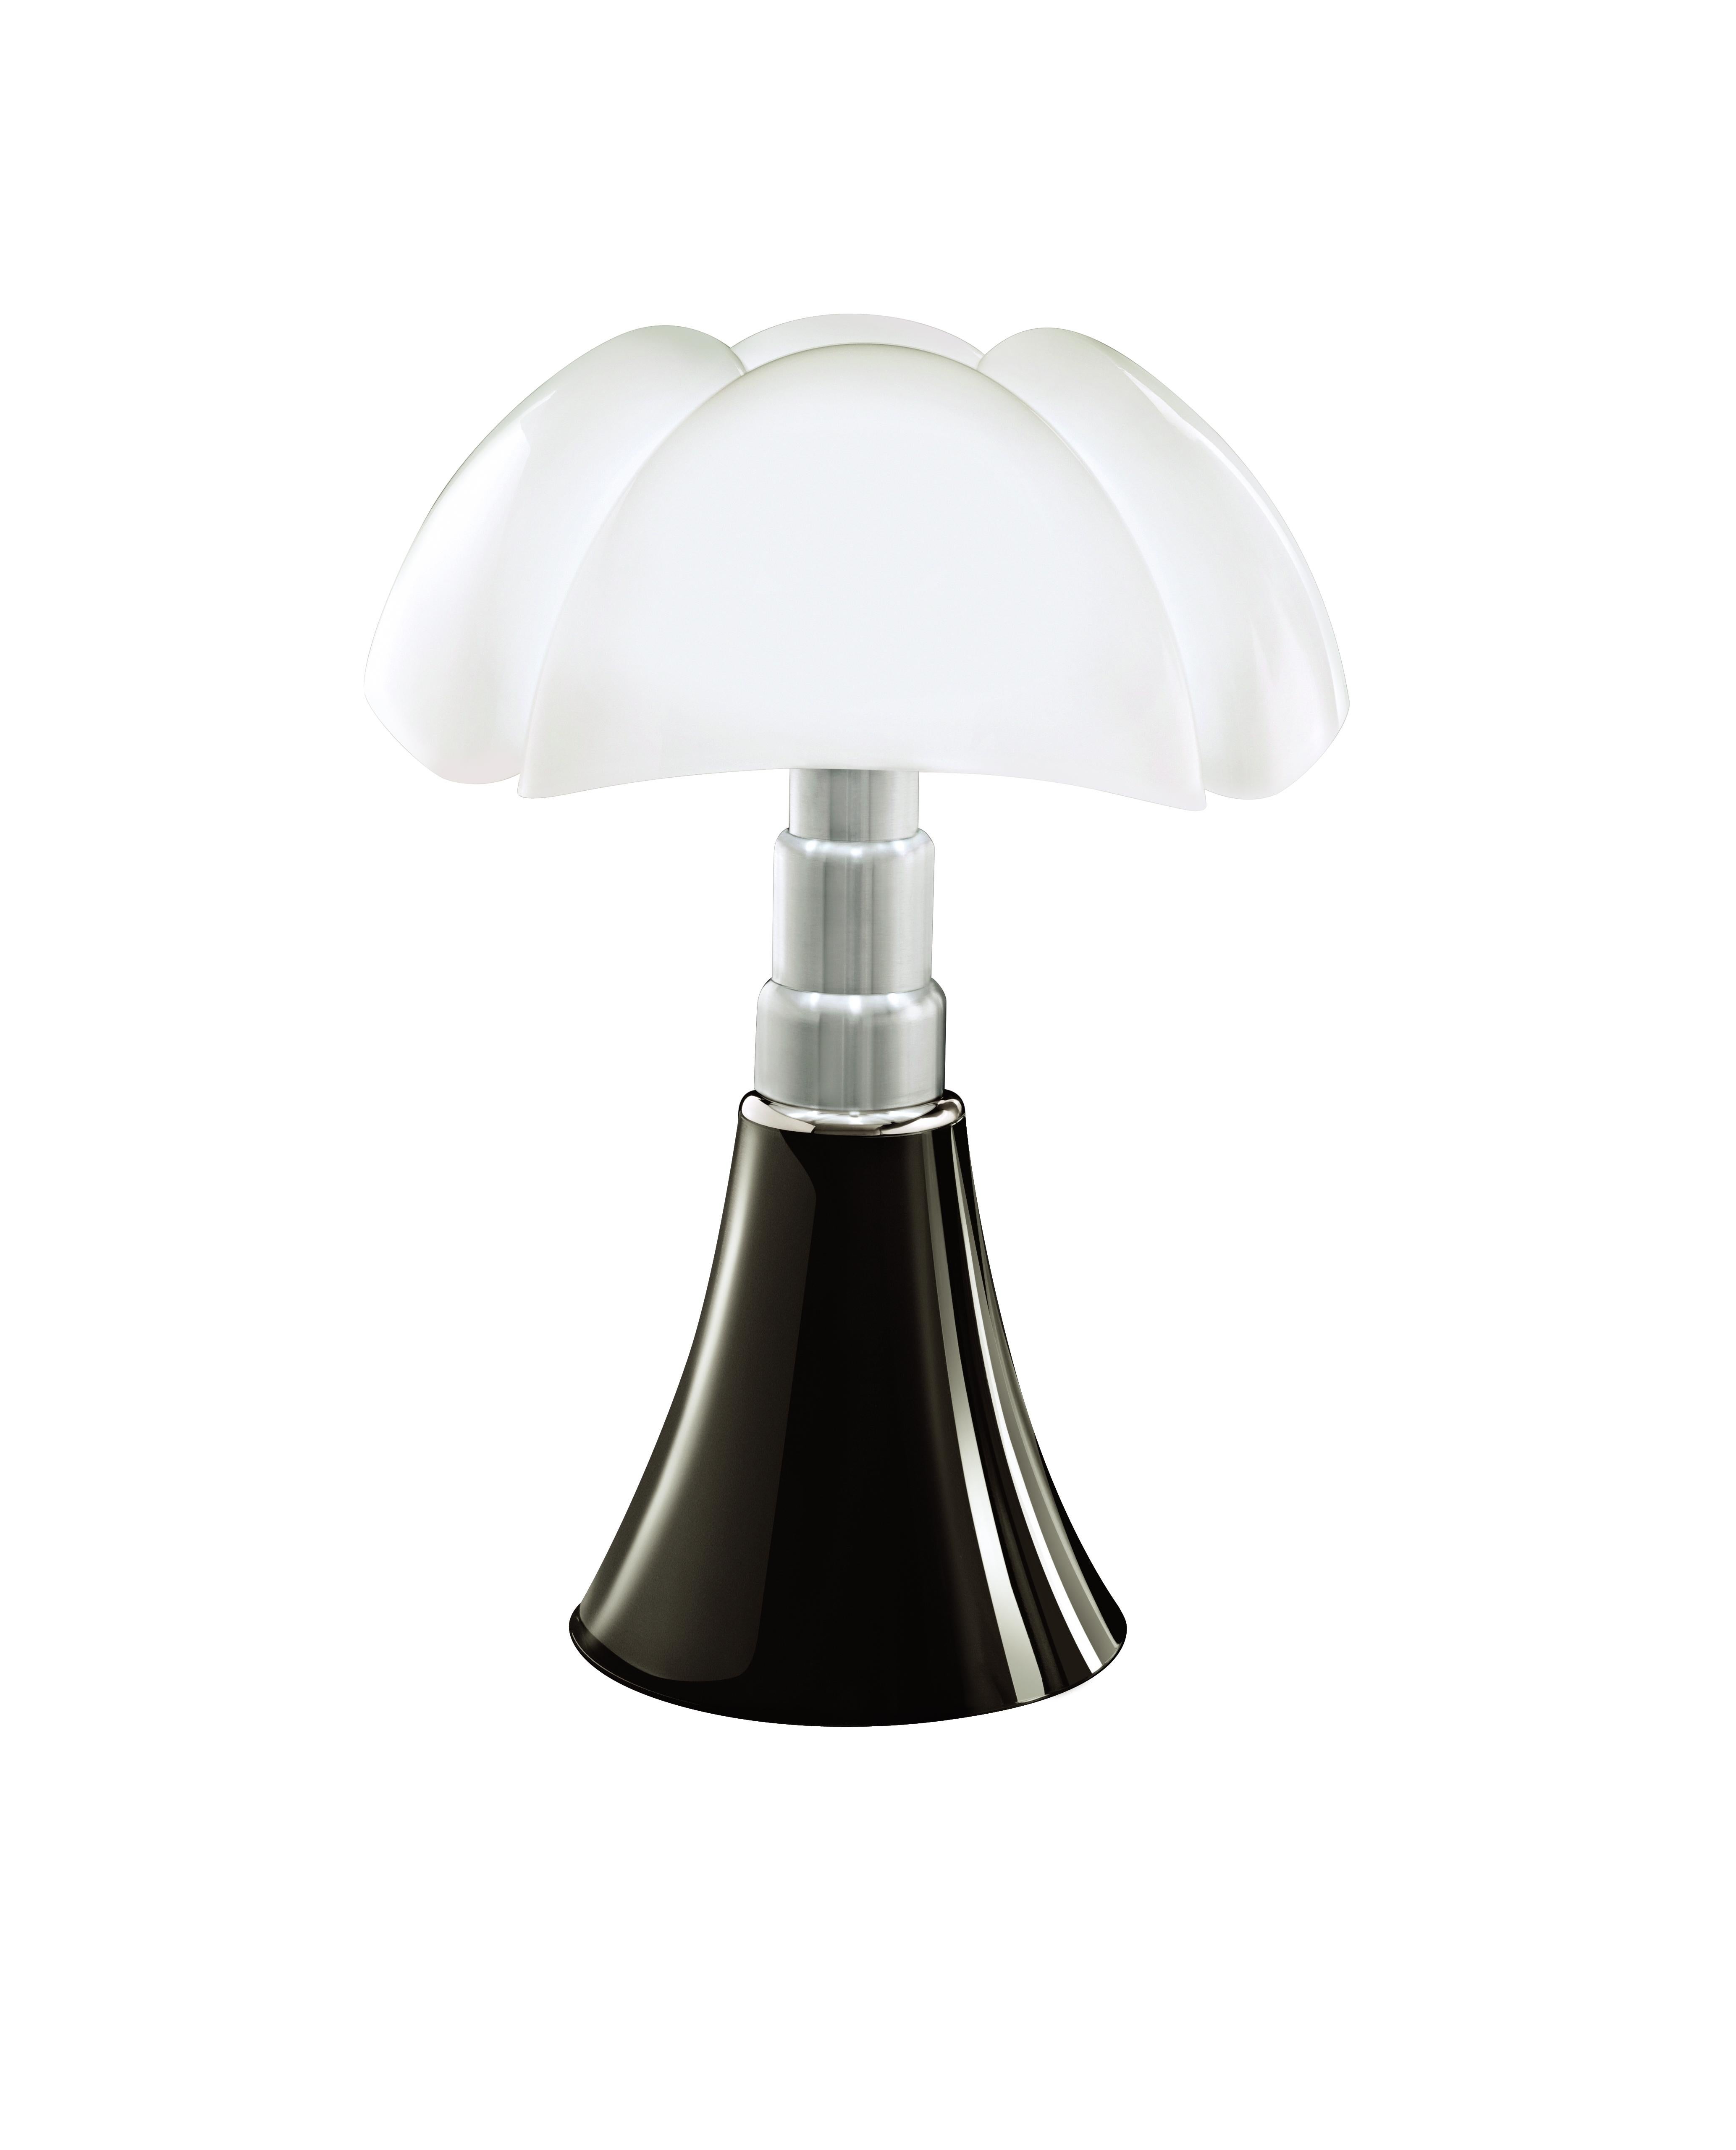 For Sale: Black (Nero Lucido) Martinelli Luce Dimmable LED Pipistrello 620 Table Lamp by Gae Aulenti